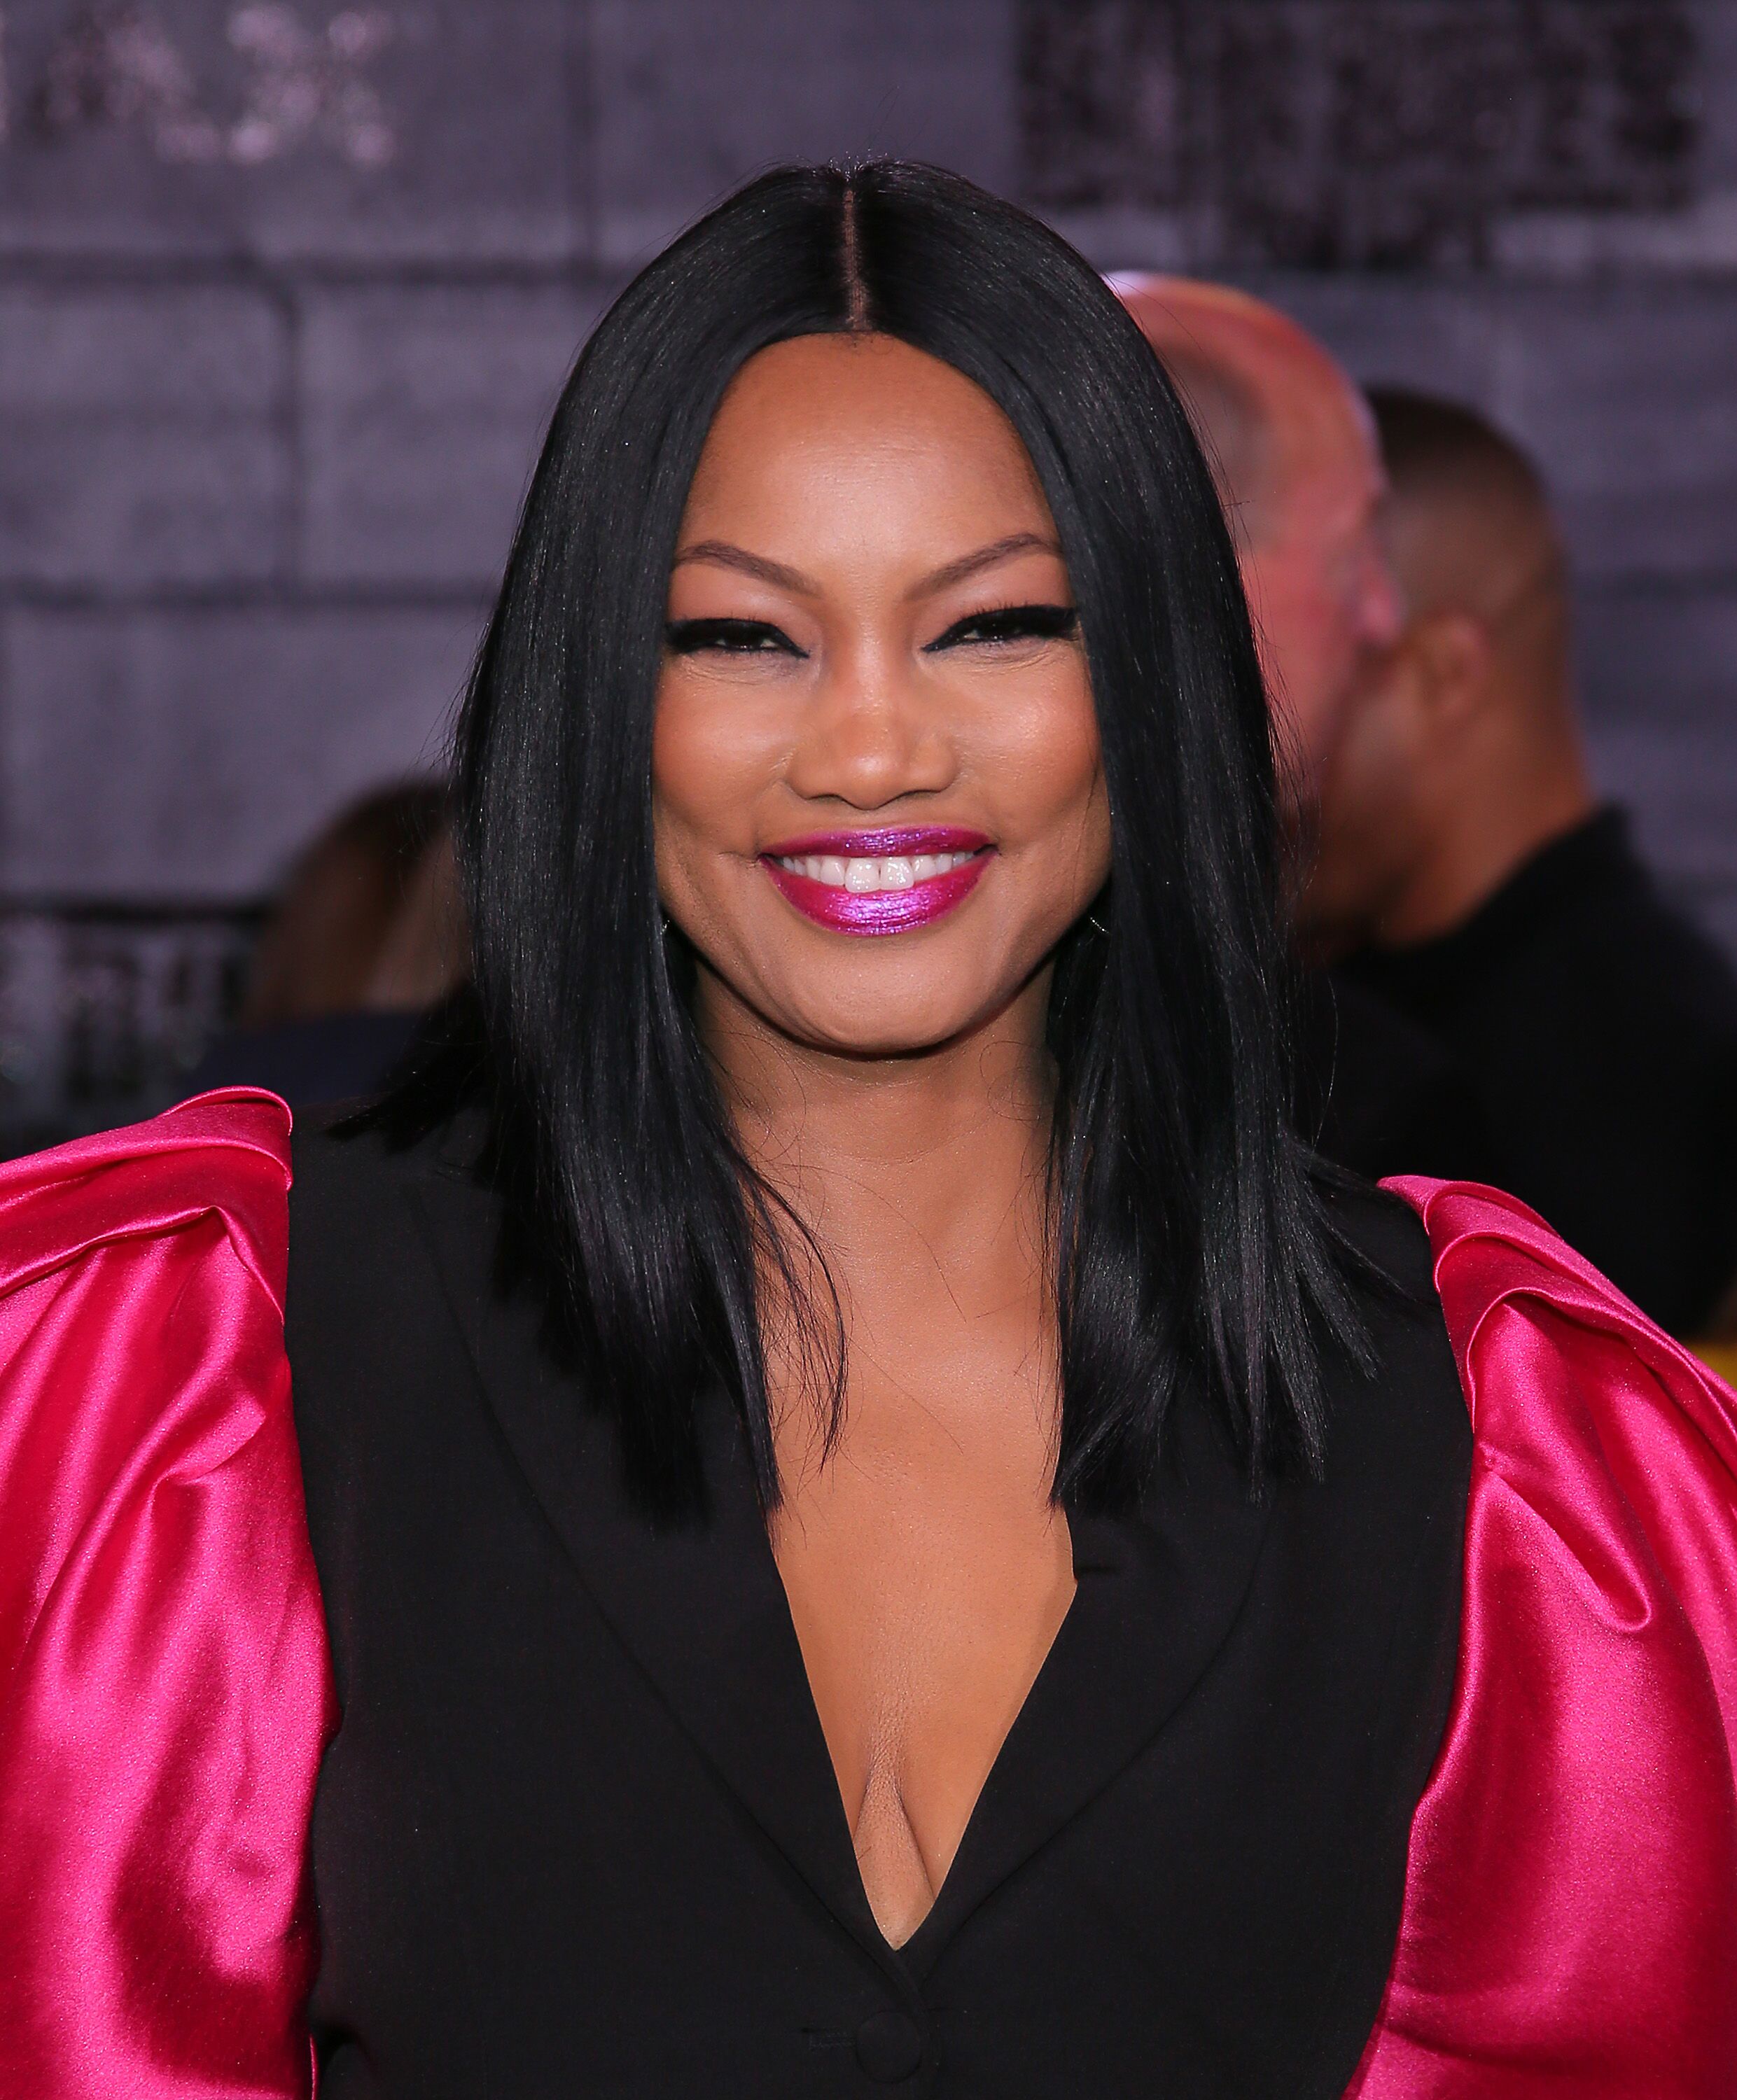 Garcelle Beauvais attends the World Premiere of "Bad Boys for Life" at TCL Chinese Theatre on January 14, 2020 in Hollywood, California. | Source: Getty Images